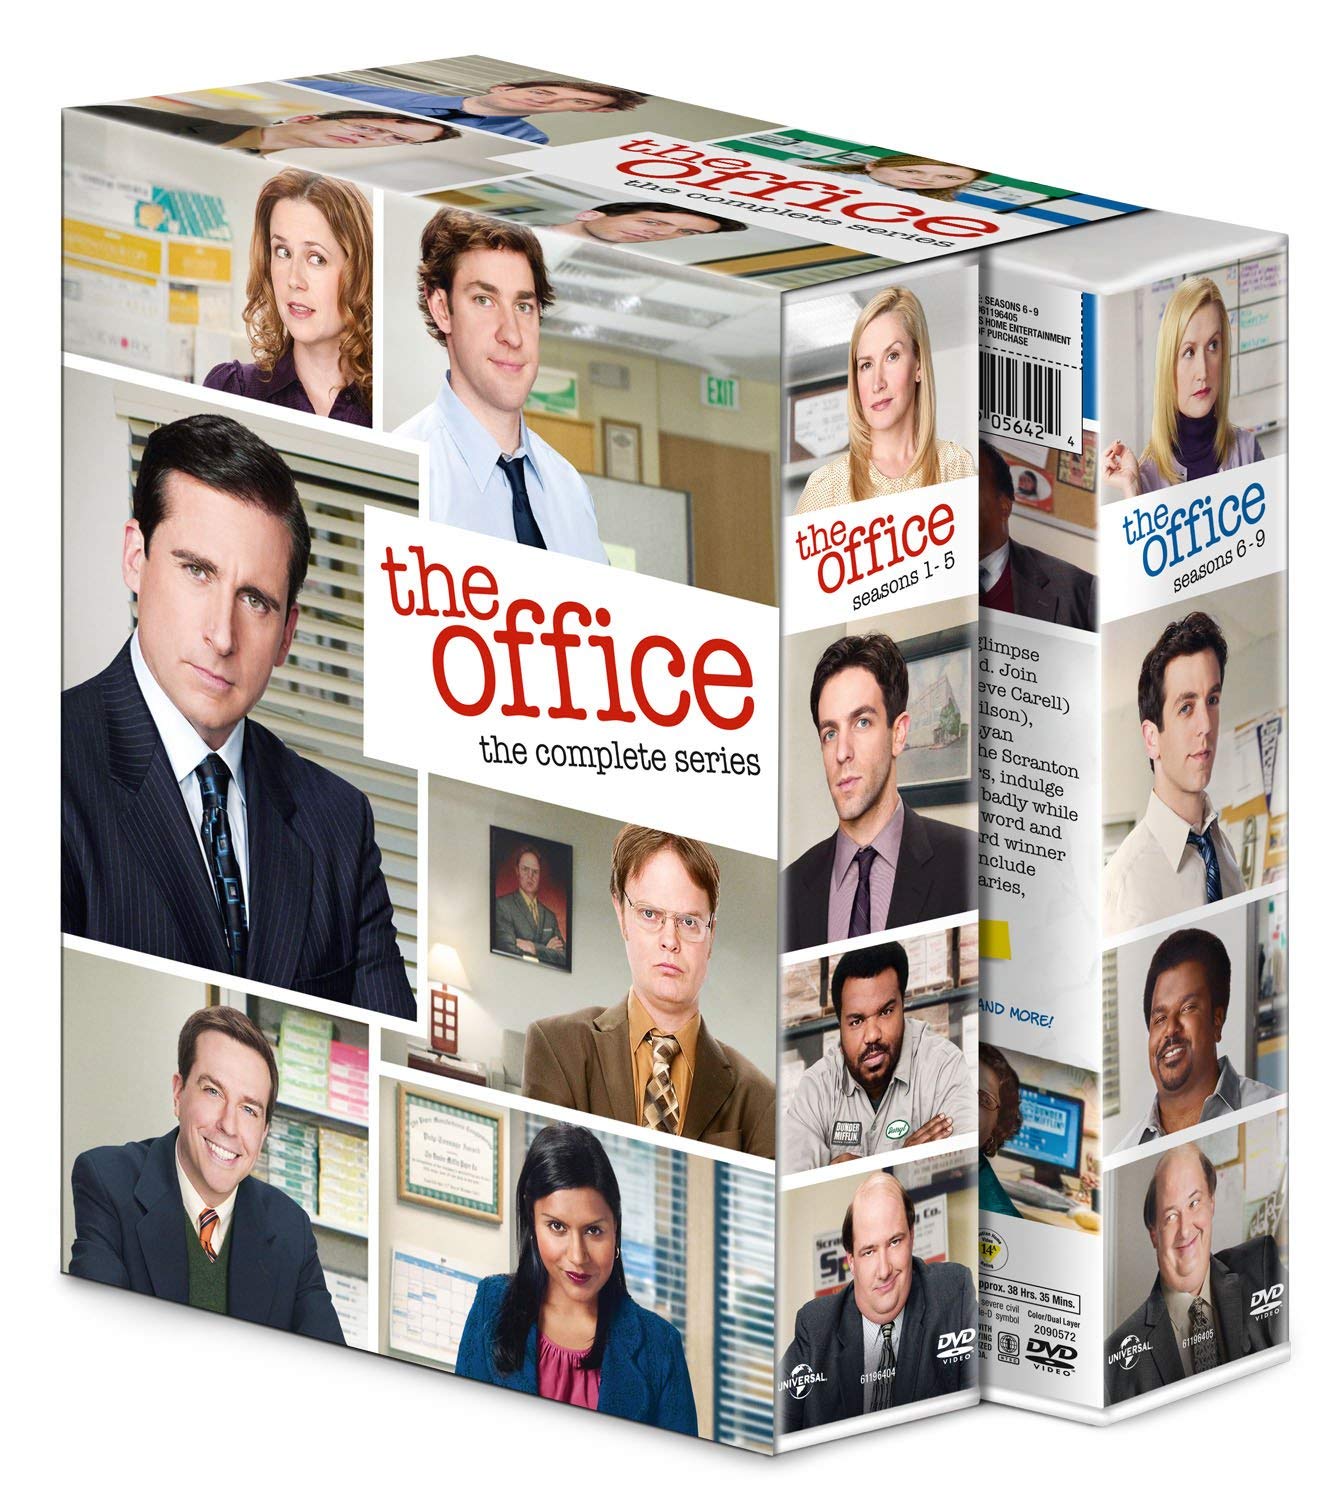 The Office on DVD complete series